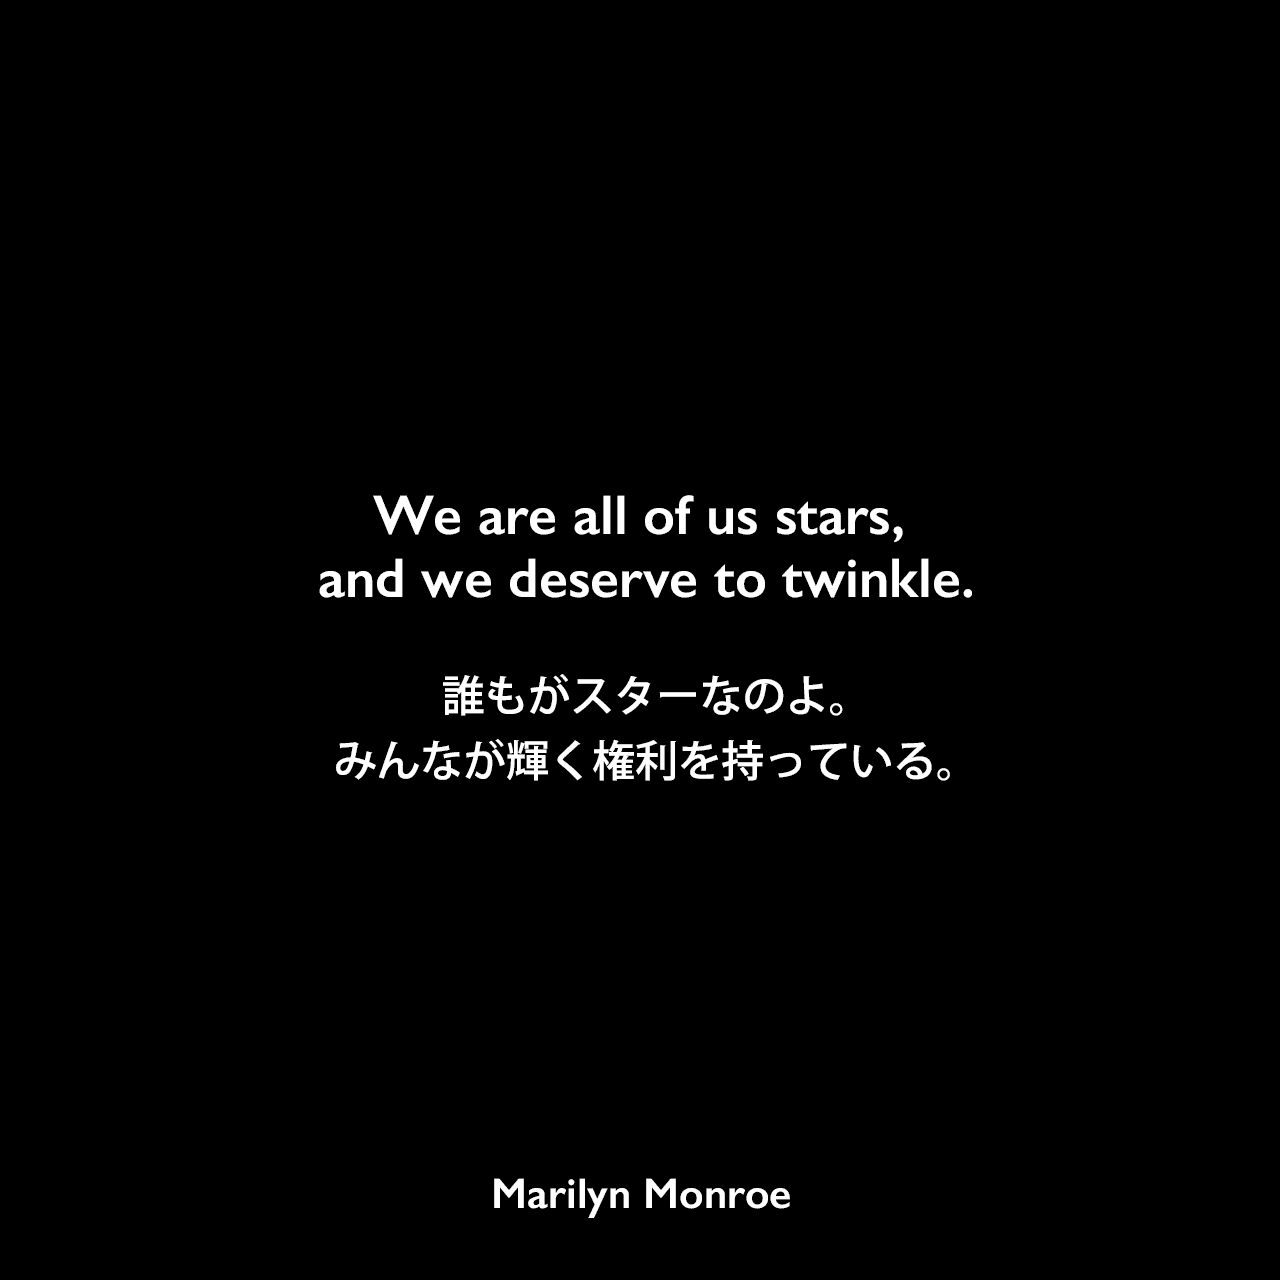 We are all of us stars, and we deserve to twinkle.誰もがスターなのよ。みんなが輝く権利を持っている。Marilyn Monroe